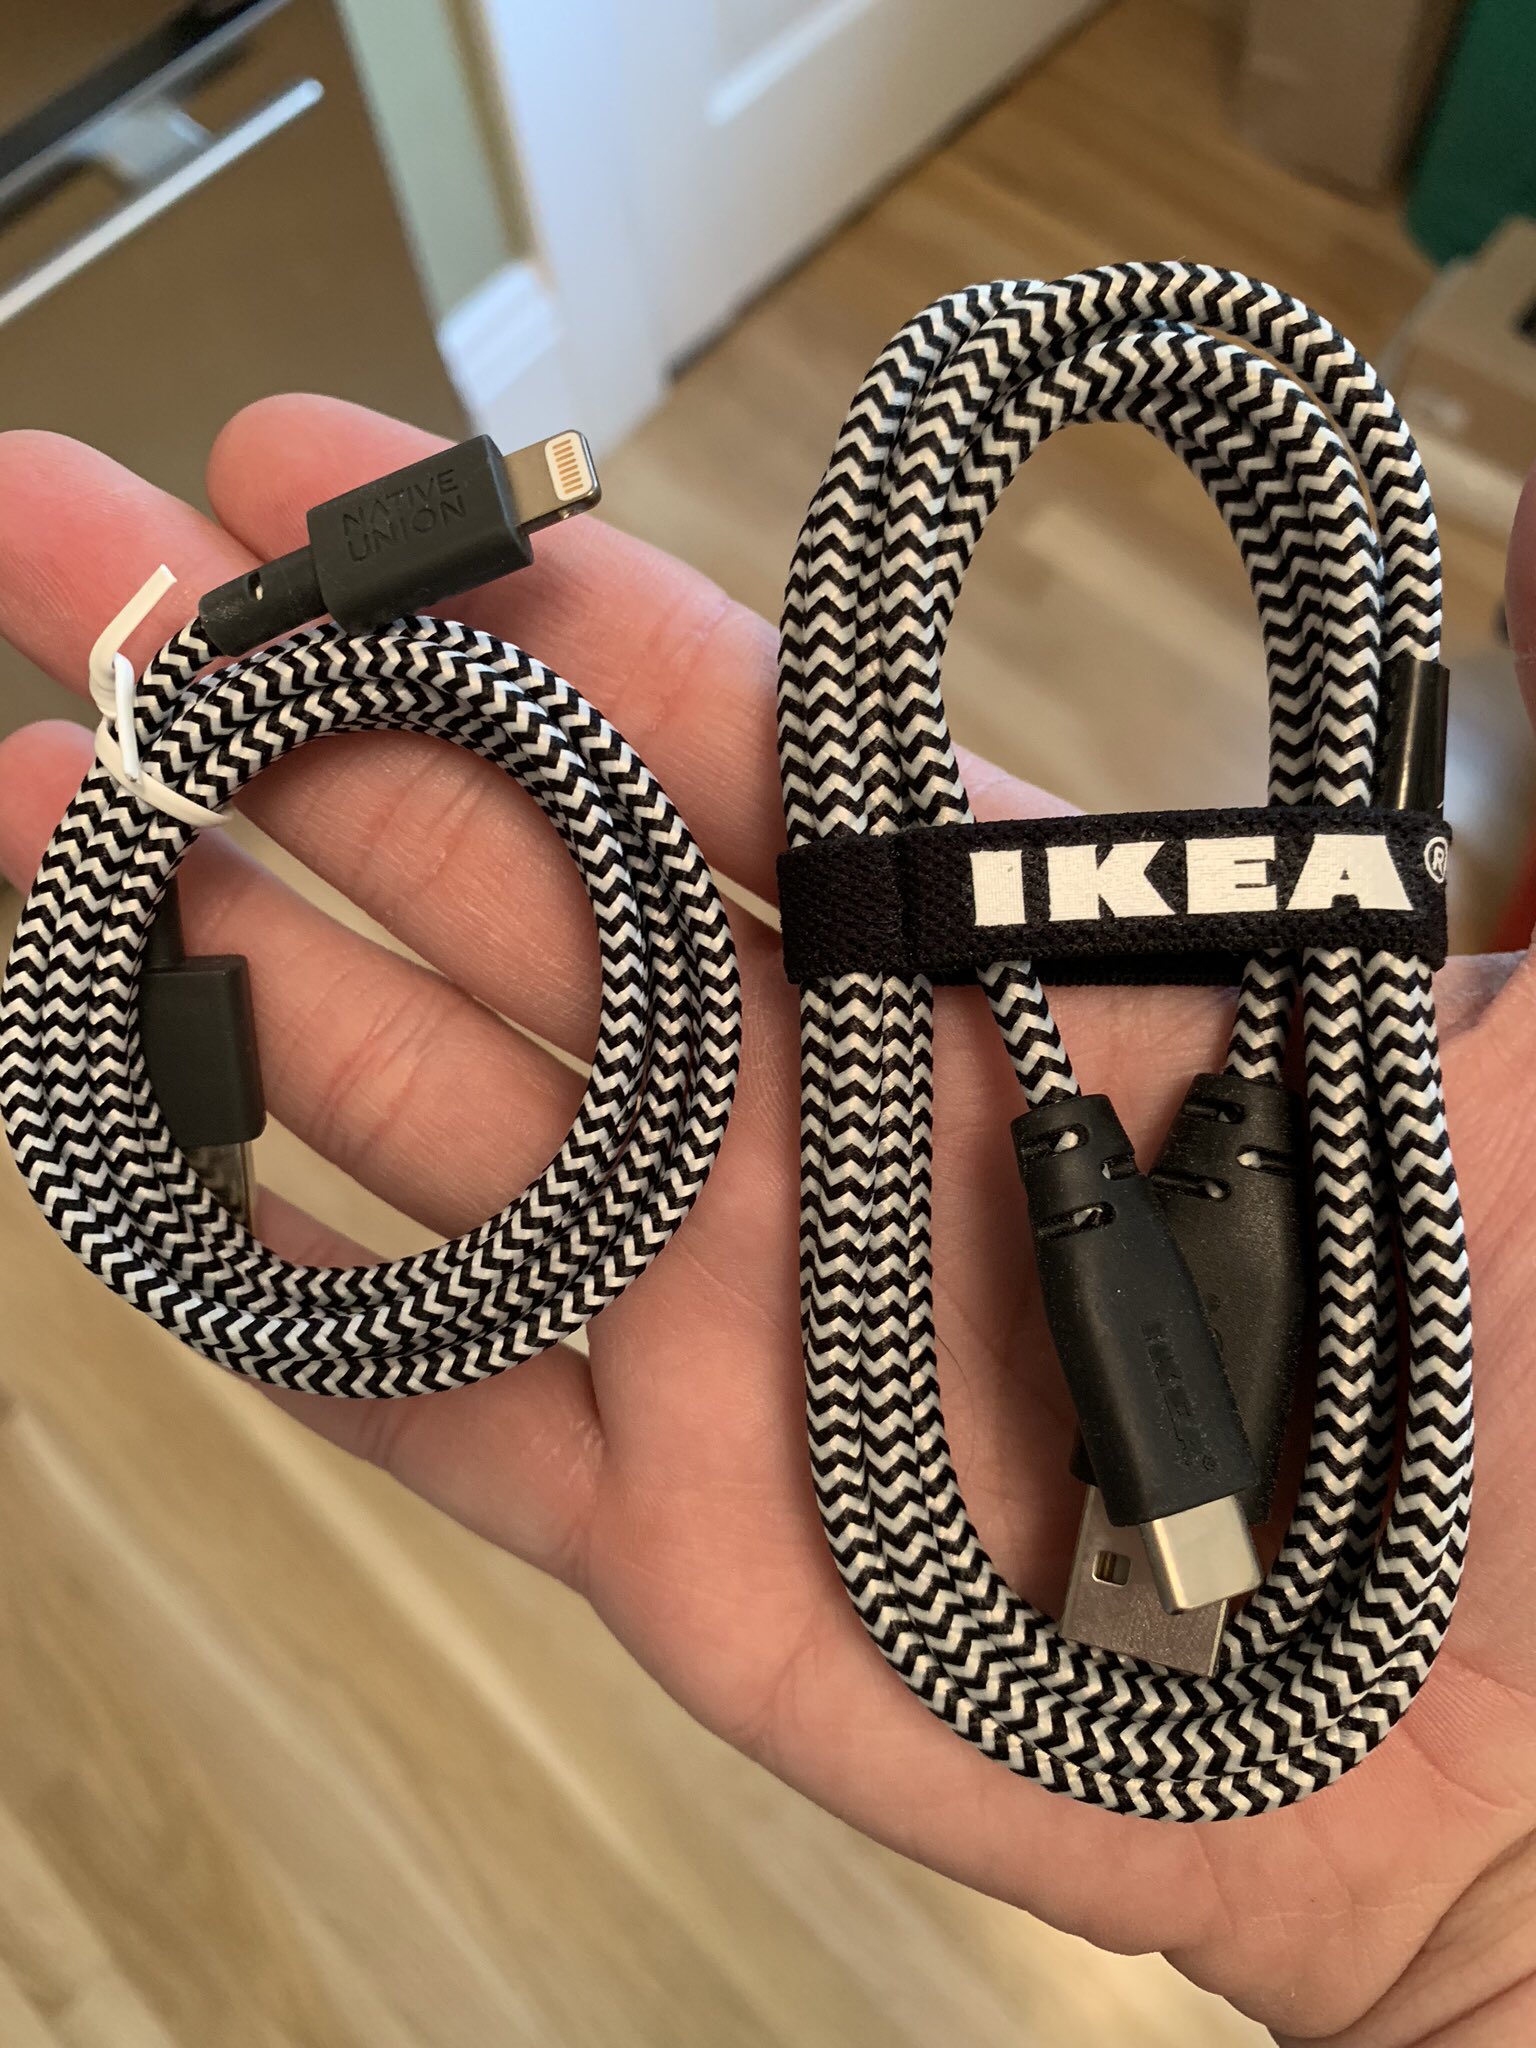 Cabel on Twitter: "Native Union lightning cable on left, IKEA USB-C cable  on right https://t.co/36TmHjzc9L" / Twitter